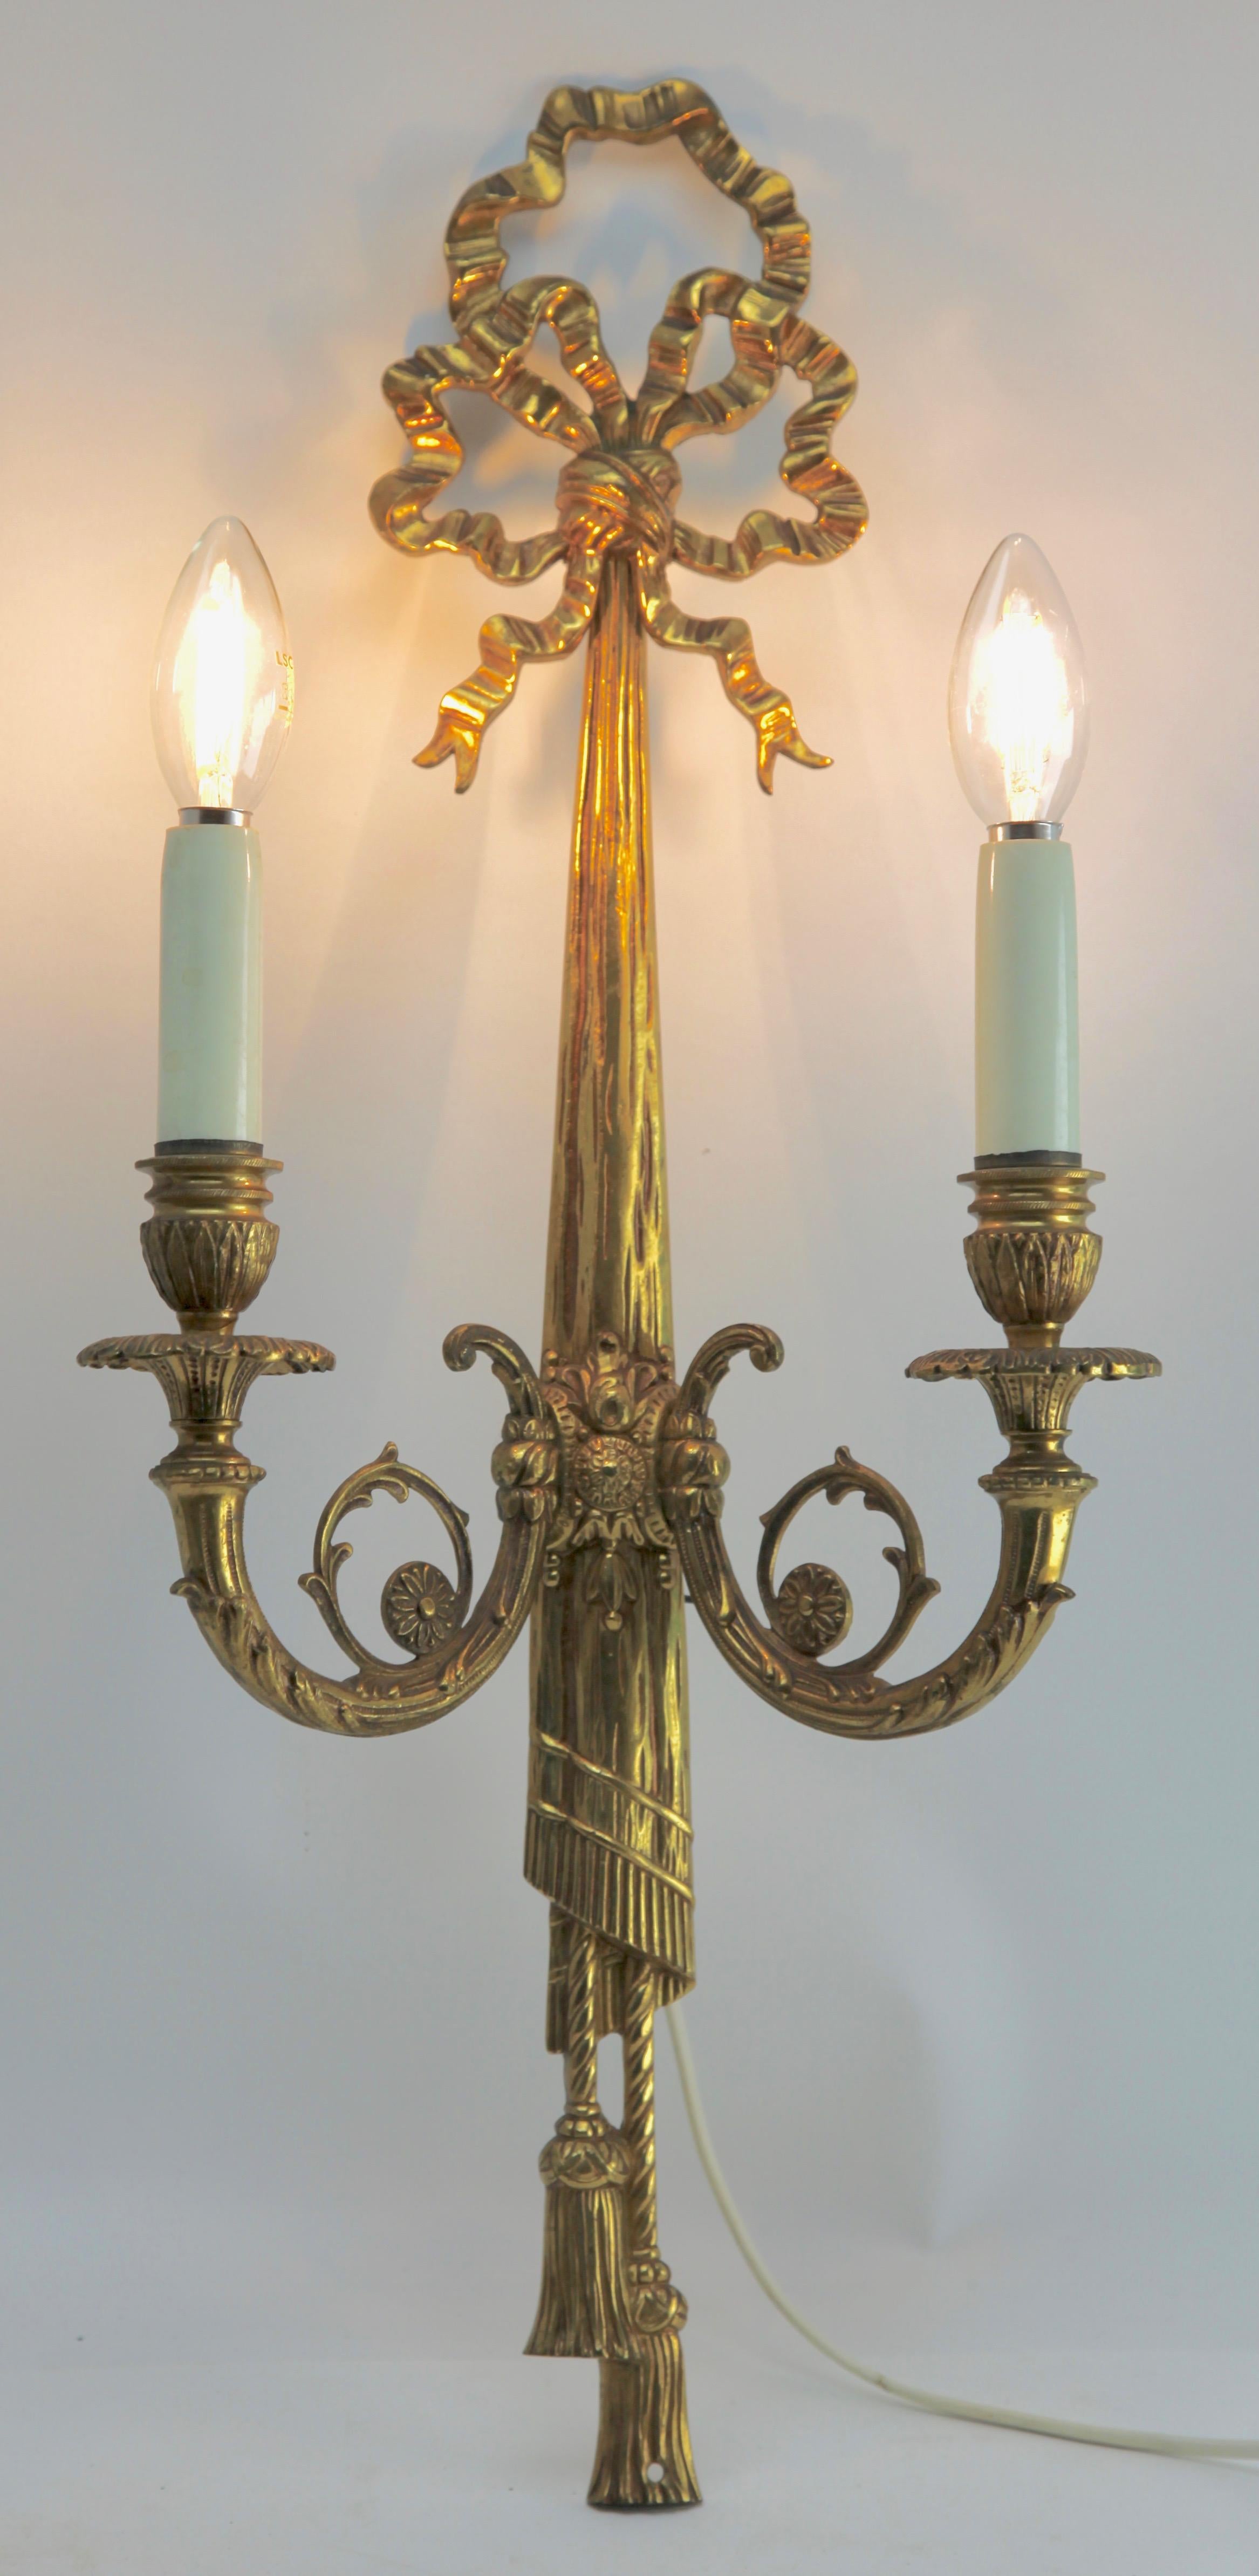 Early 20th Century Pair of Brass Two-Light Sconces in Louis XVI Style